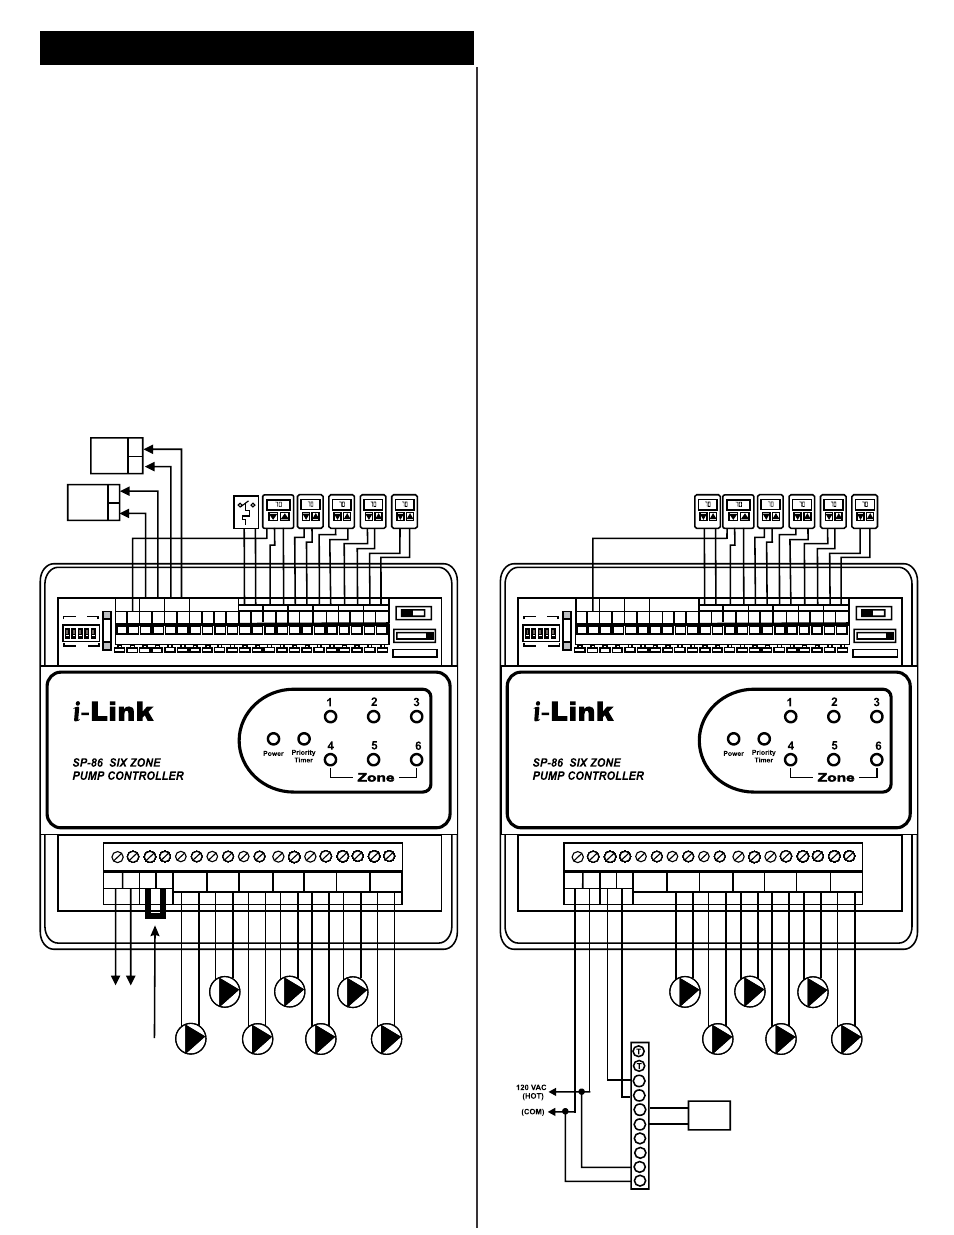 Operation and typical wiring diagrams, Jumper placement, Figure 2 figure 3 | AZEL i-Link SERIES ZONE CONTROLS (CIRCULATOR PUMP SWITCHING RELAYS ) FOR HYDRONIC / RADIANT FLOOR HEATING SYSTEMS User Manual | Page 3 / 4